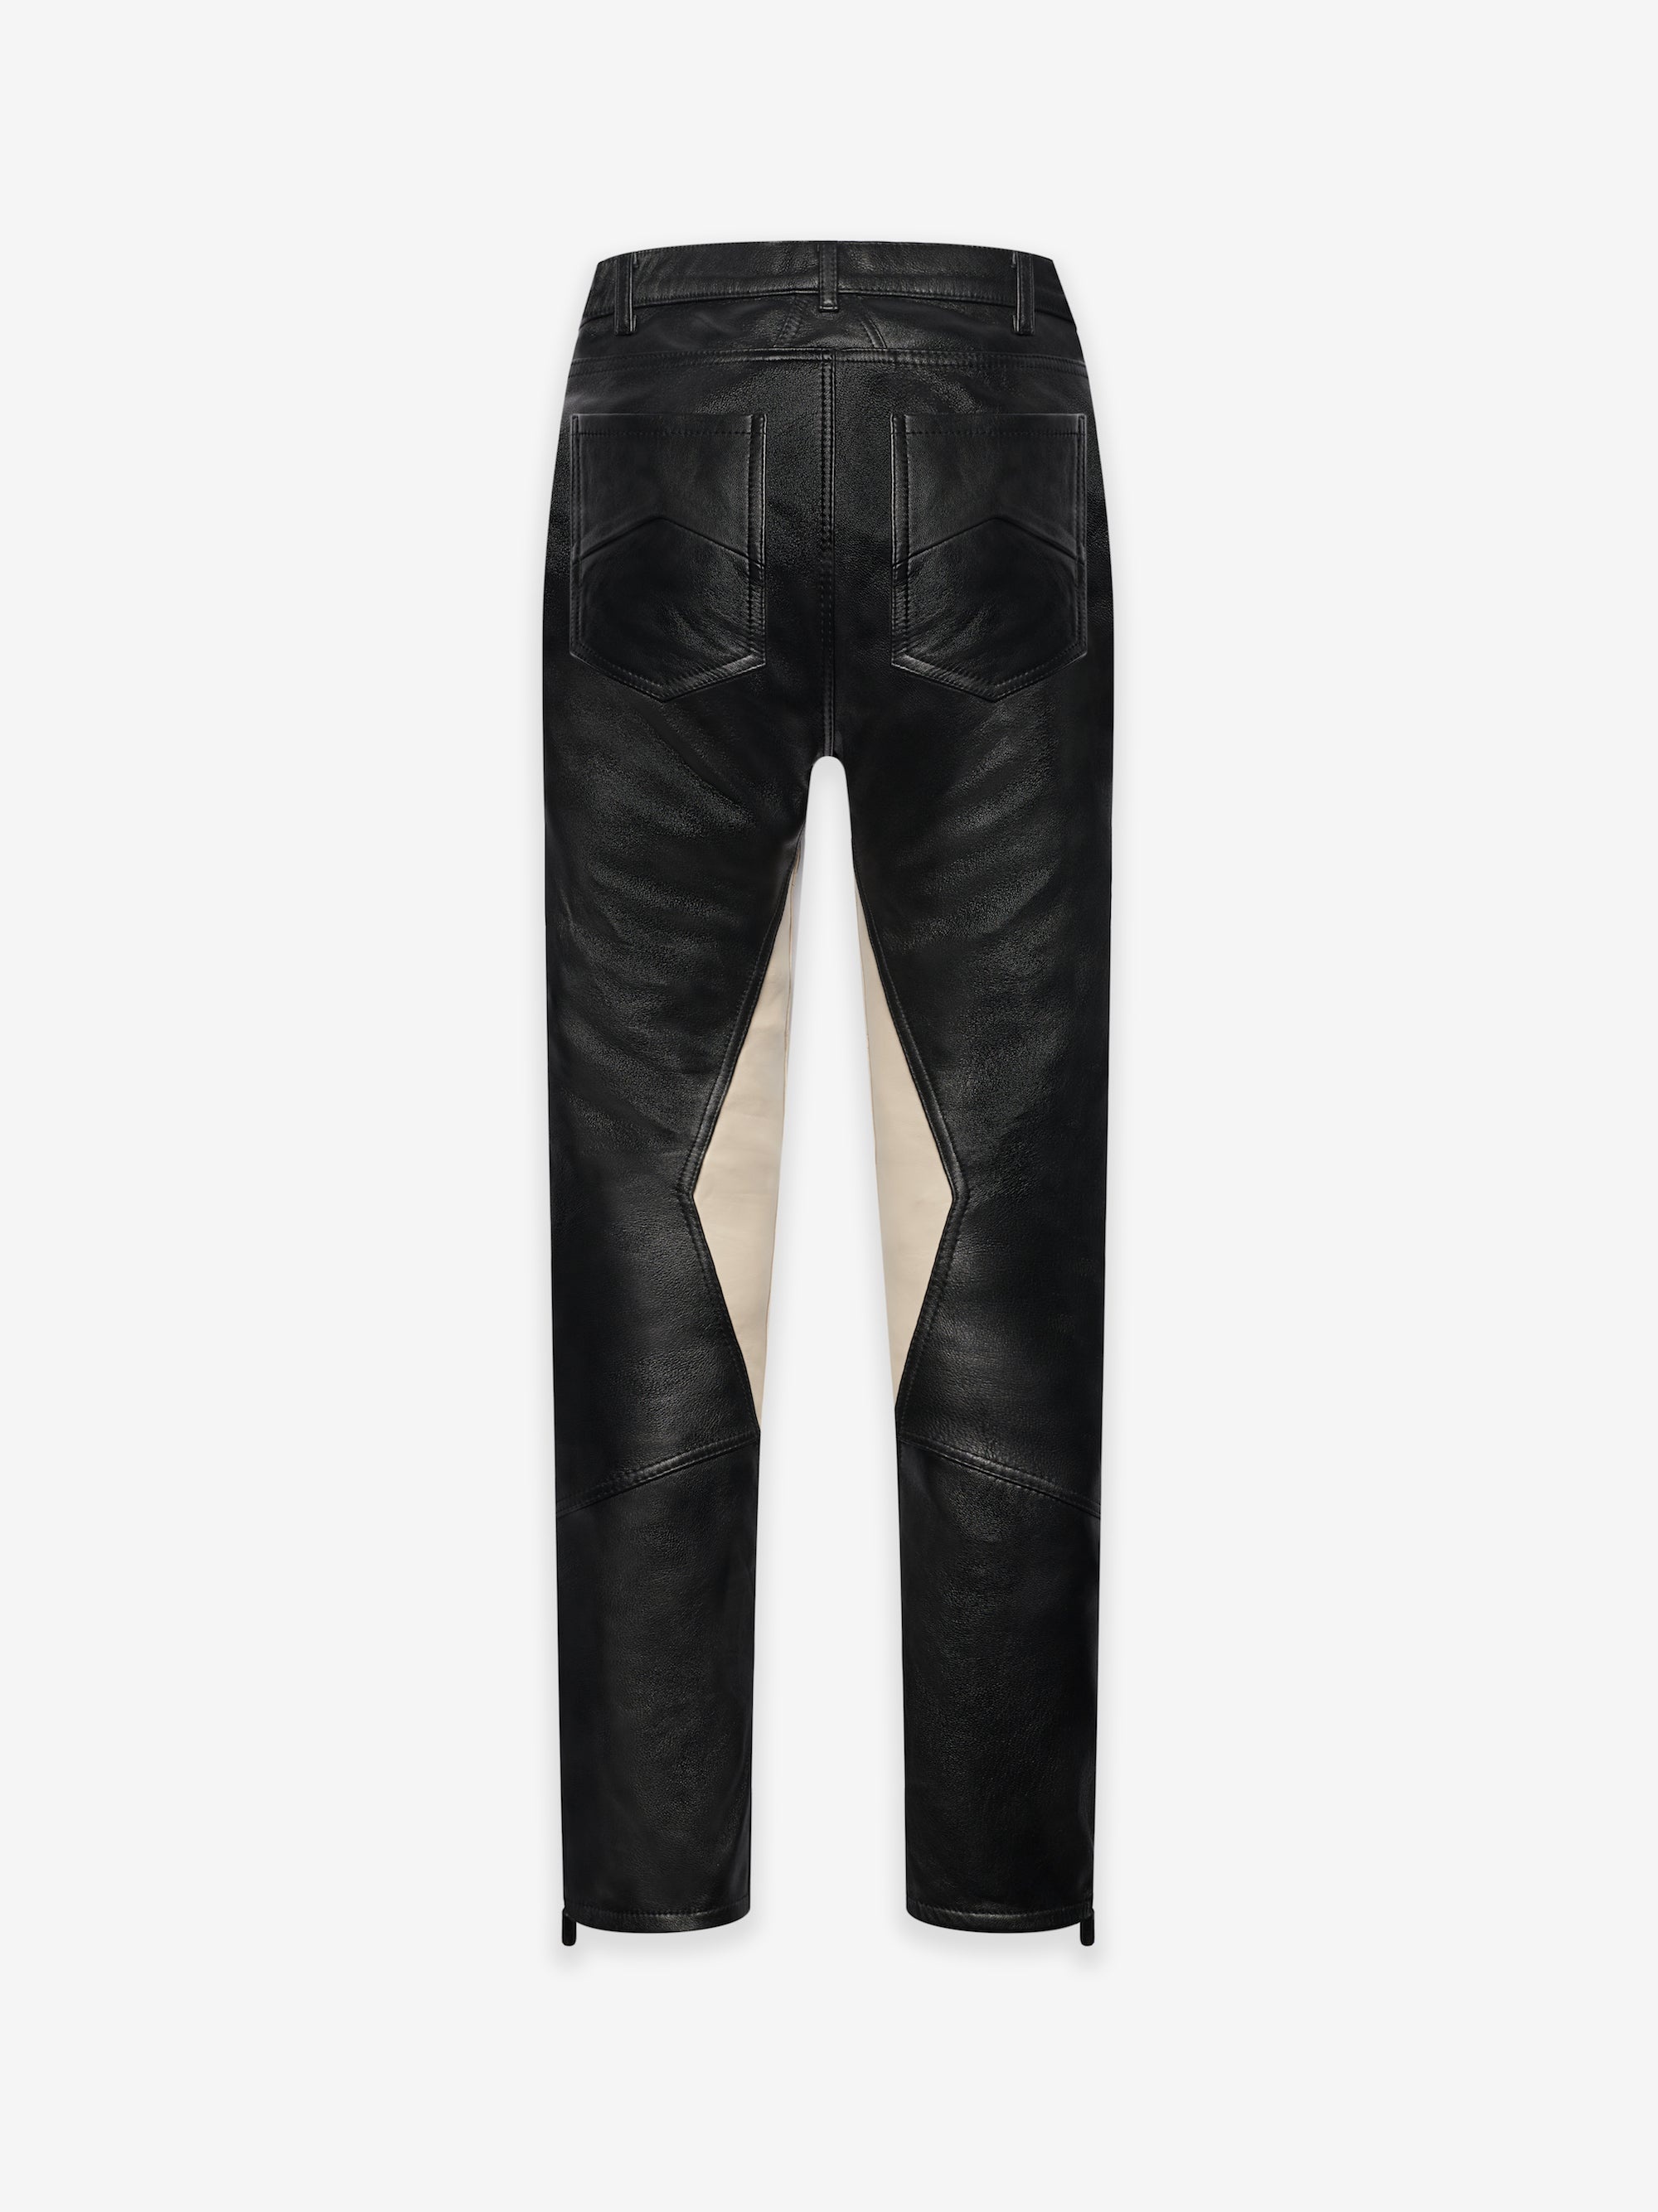 LEATHER RHACER PANTS - 2